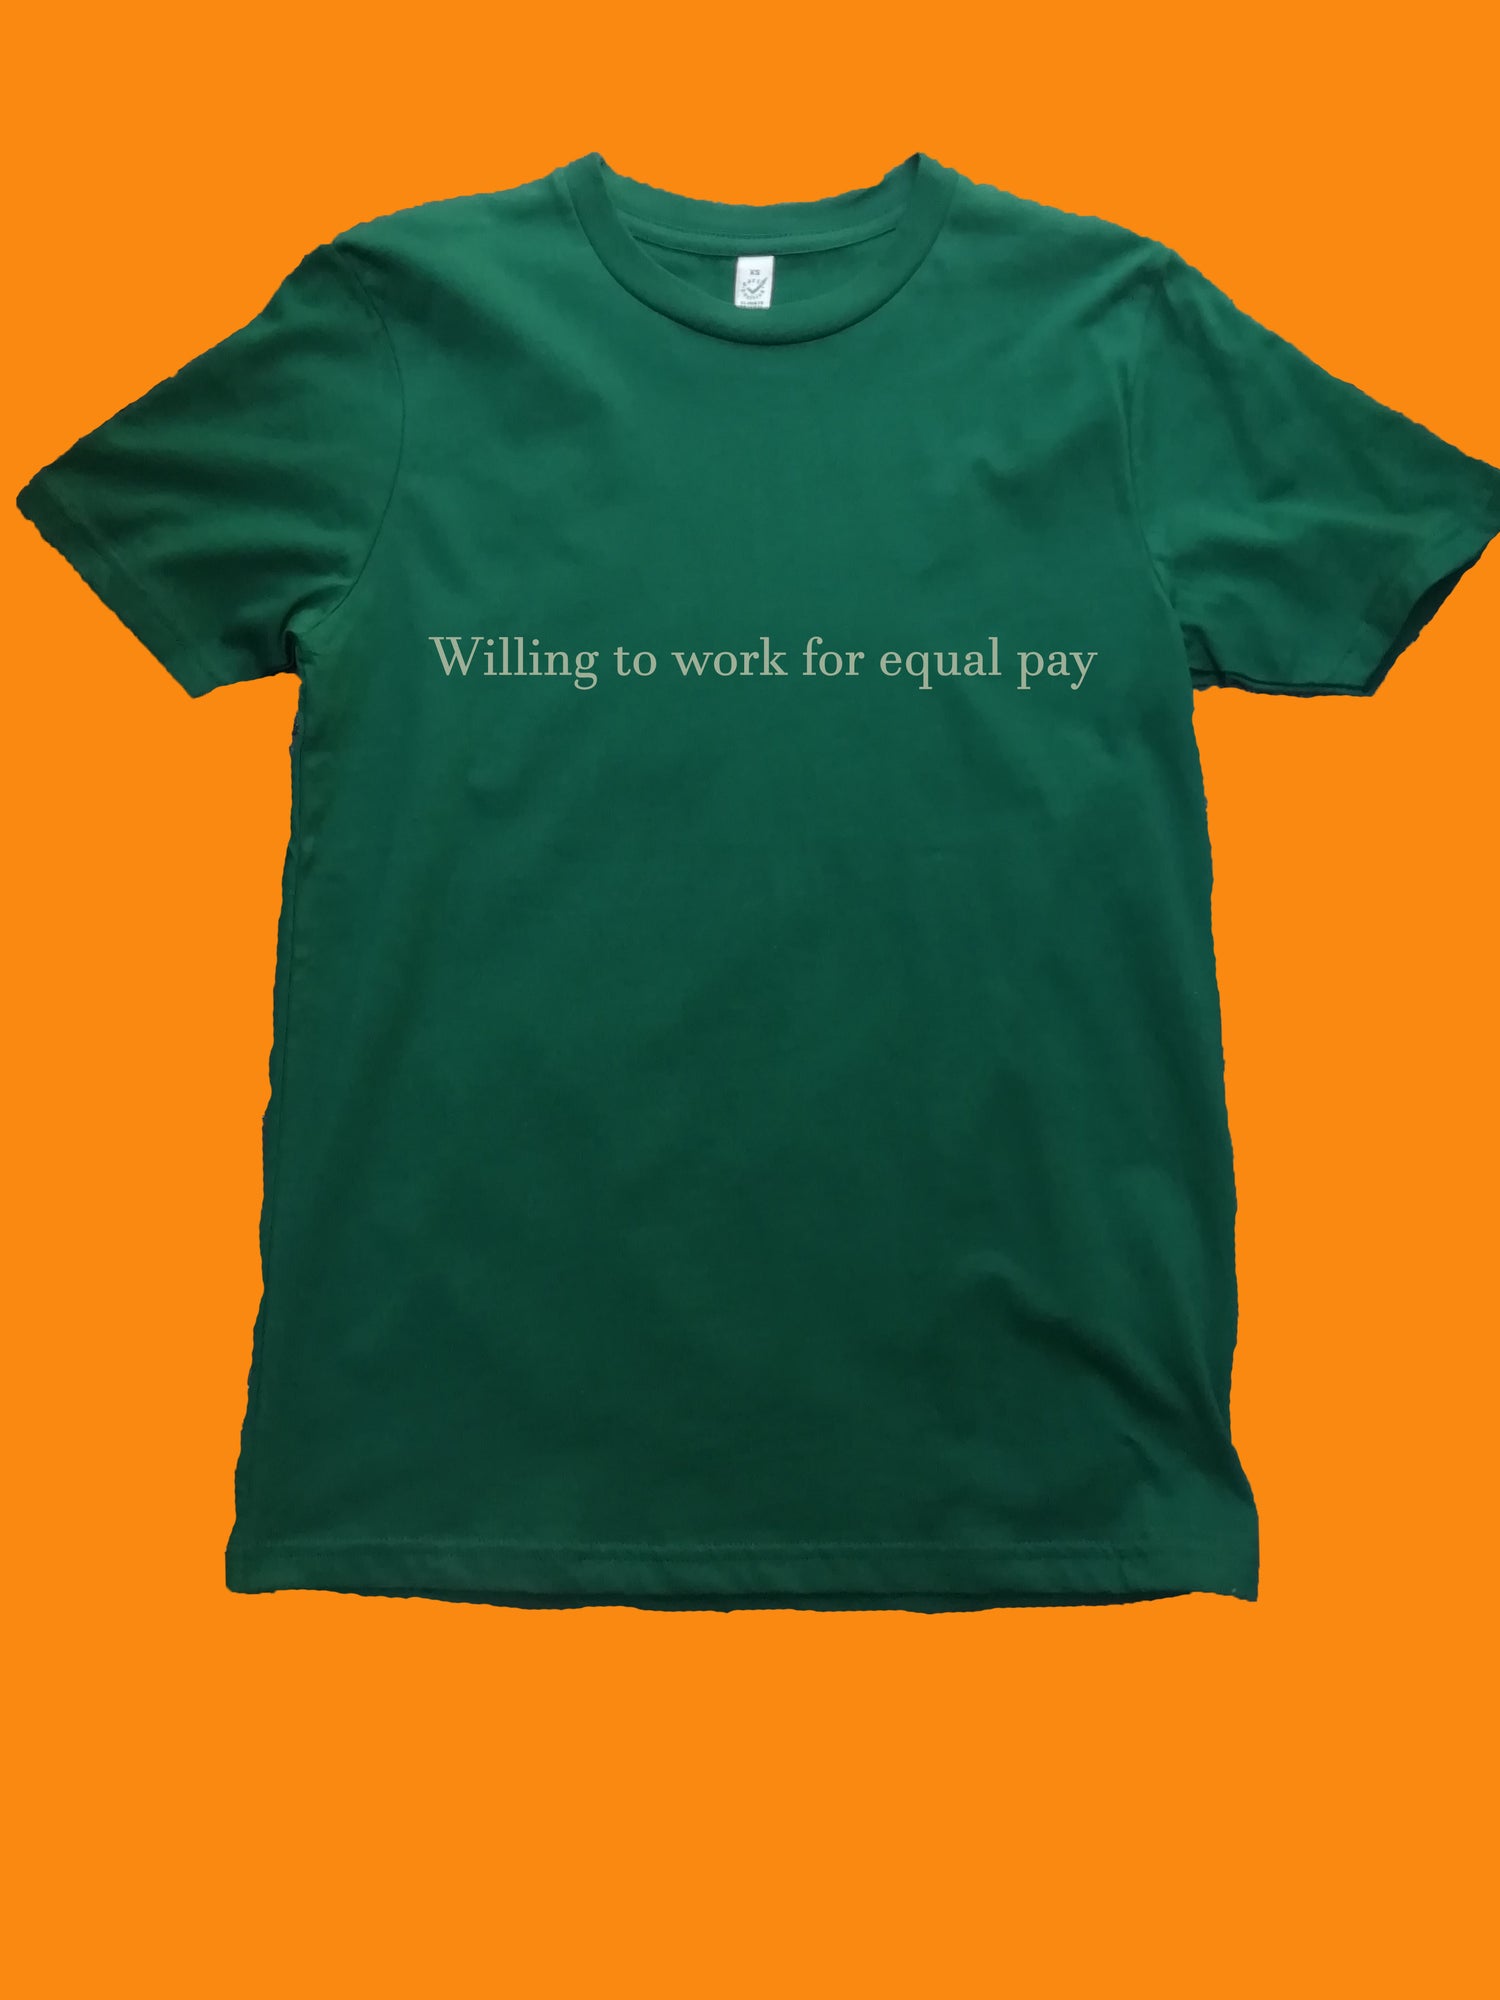 Willing to work for equal pay feminist slogan Organic Shirt